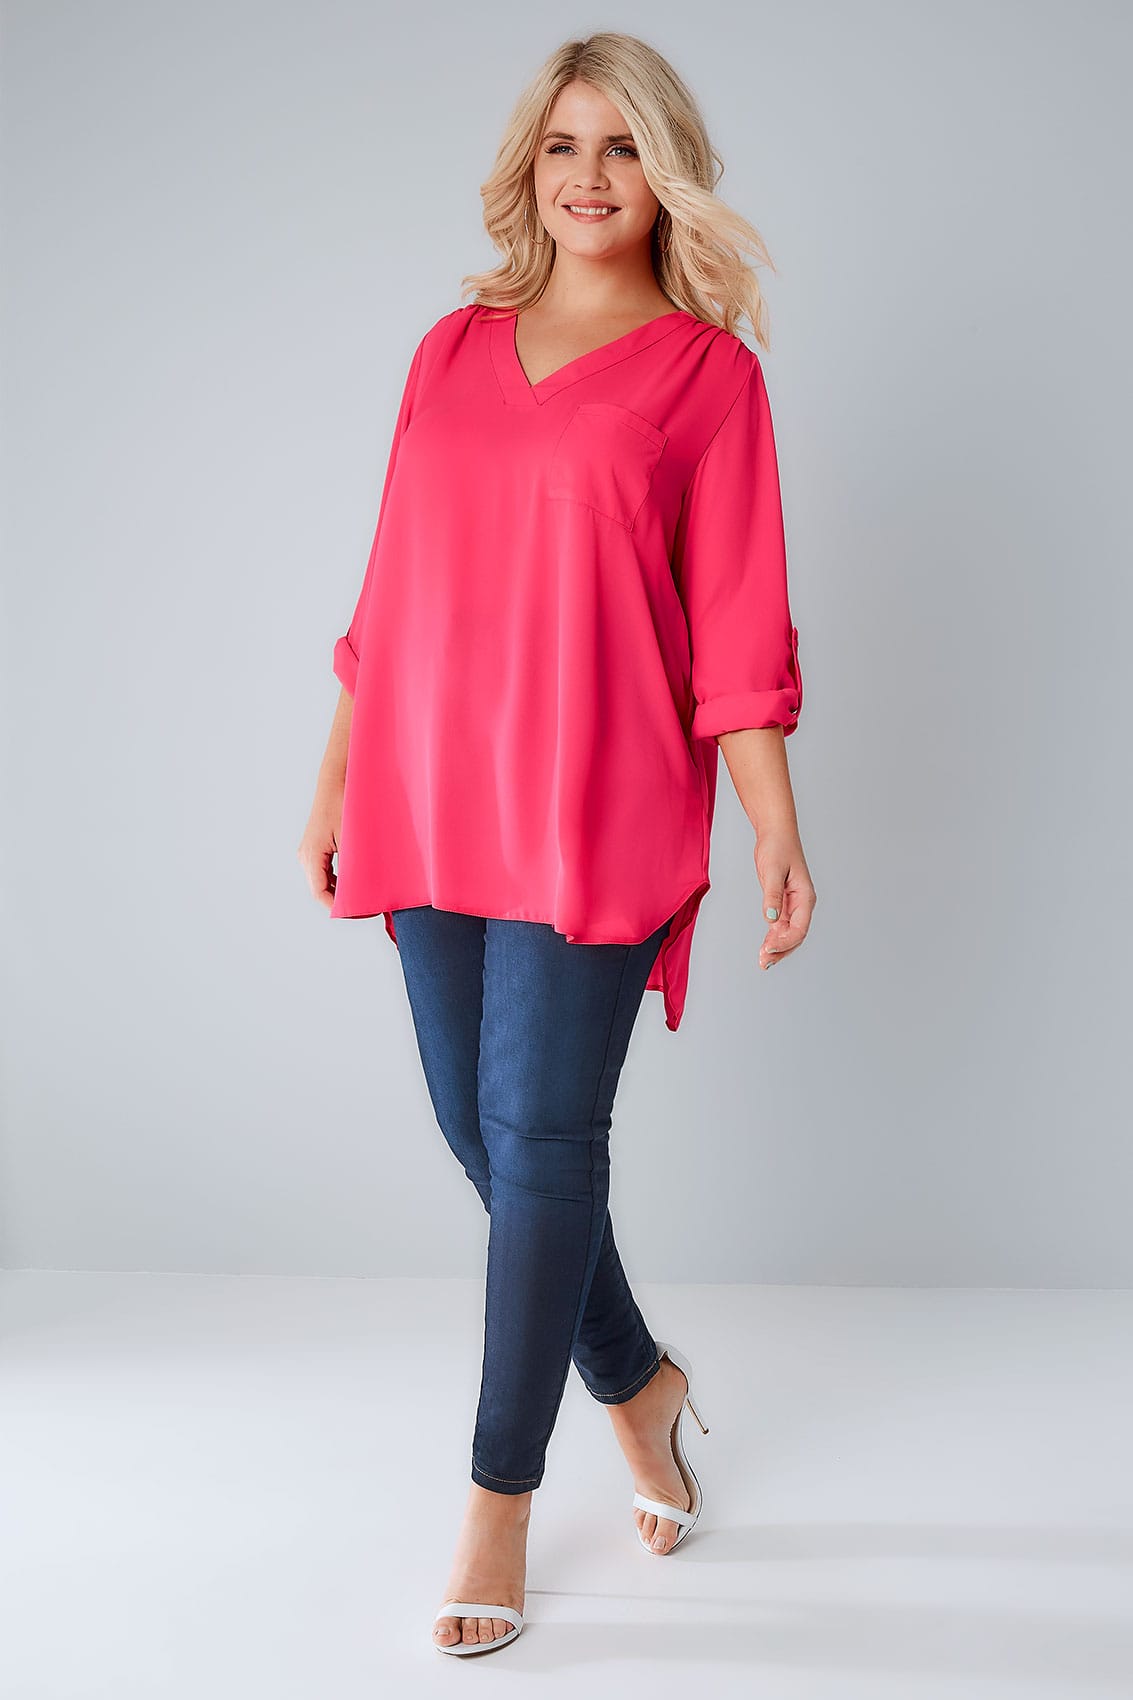 Magenta Pink Woven V-Neck Blouse With Pocket, Plus size 16 to 32